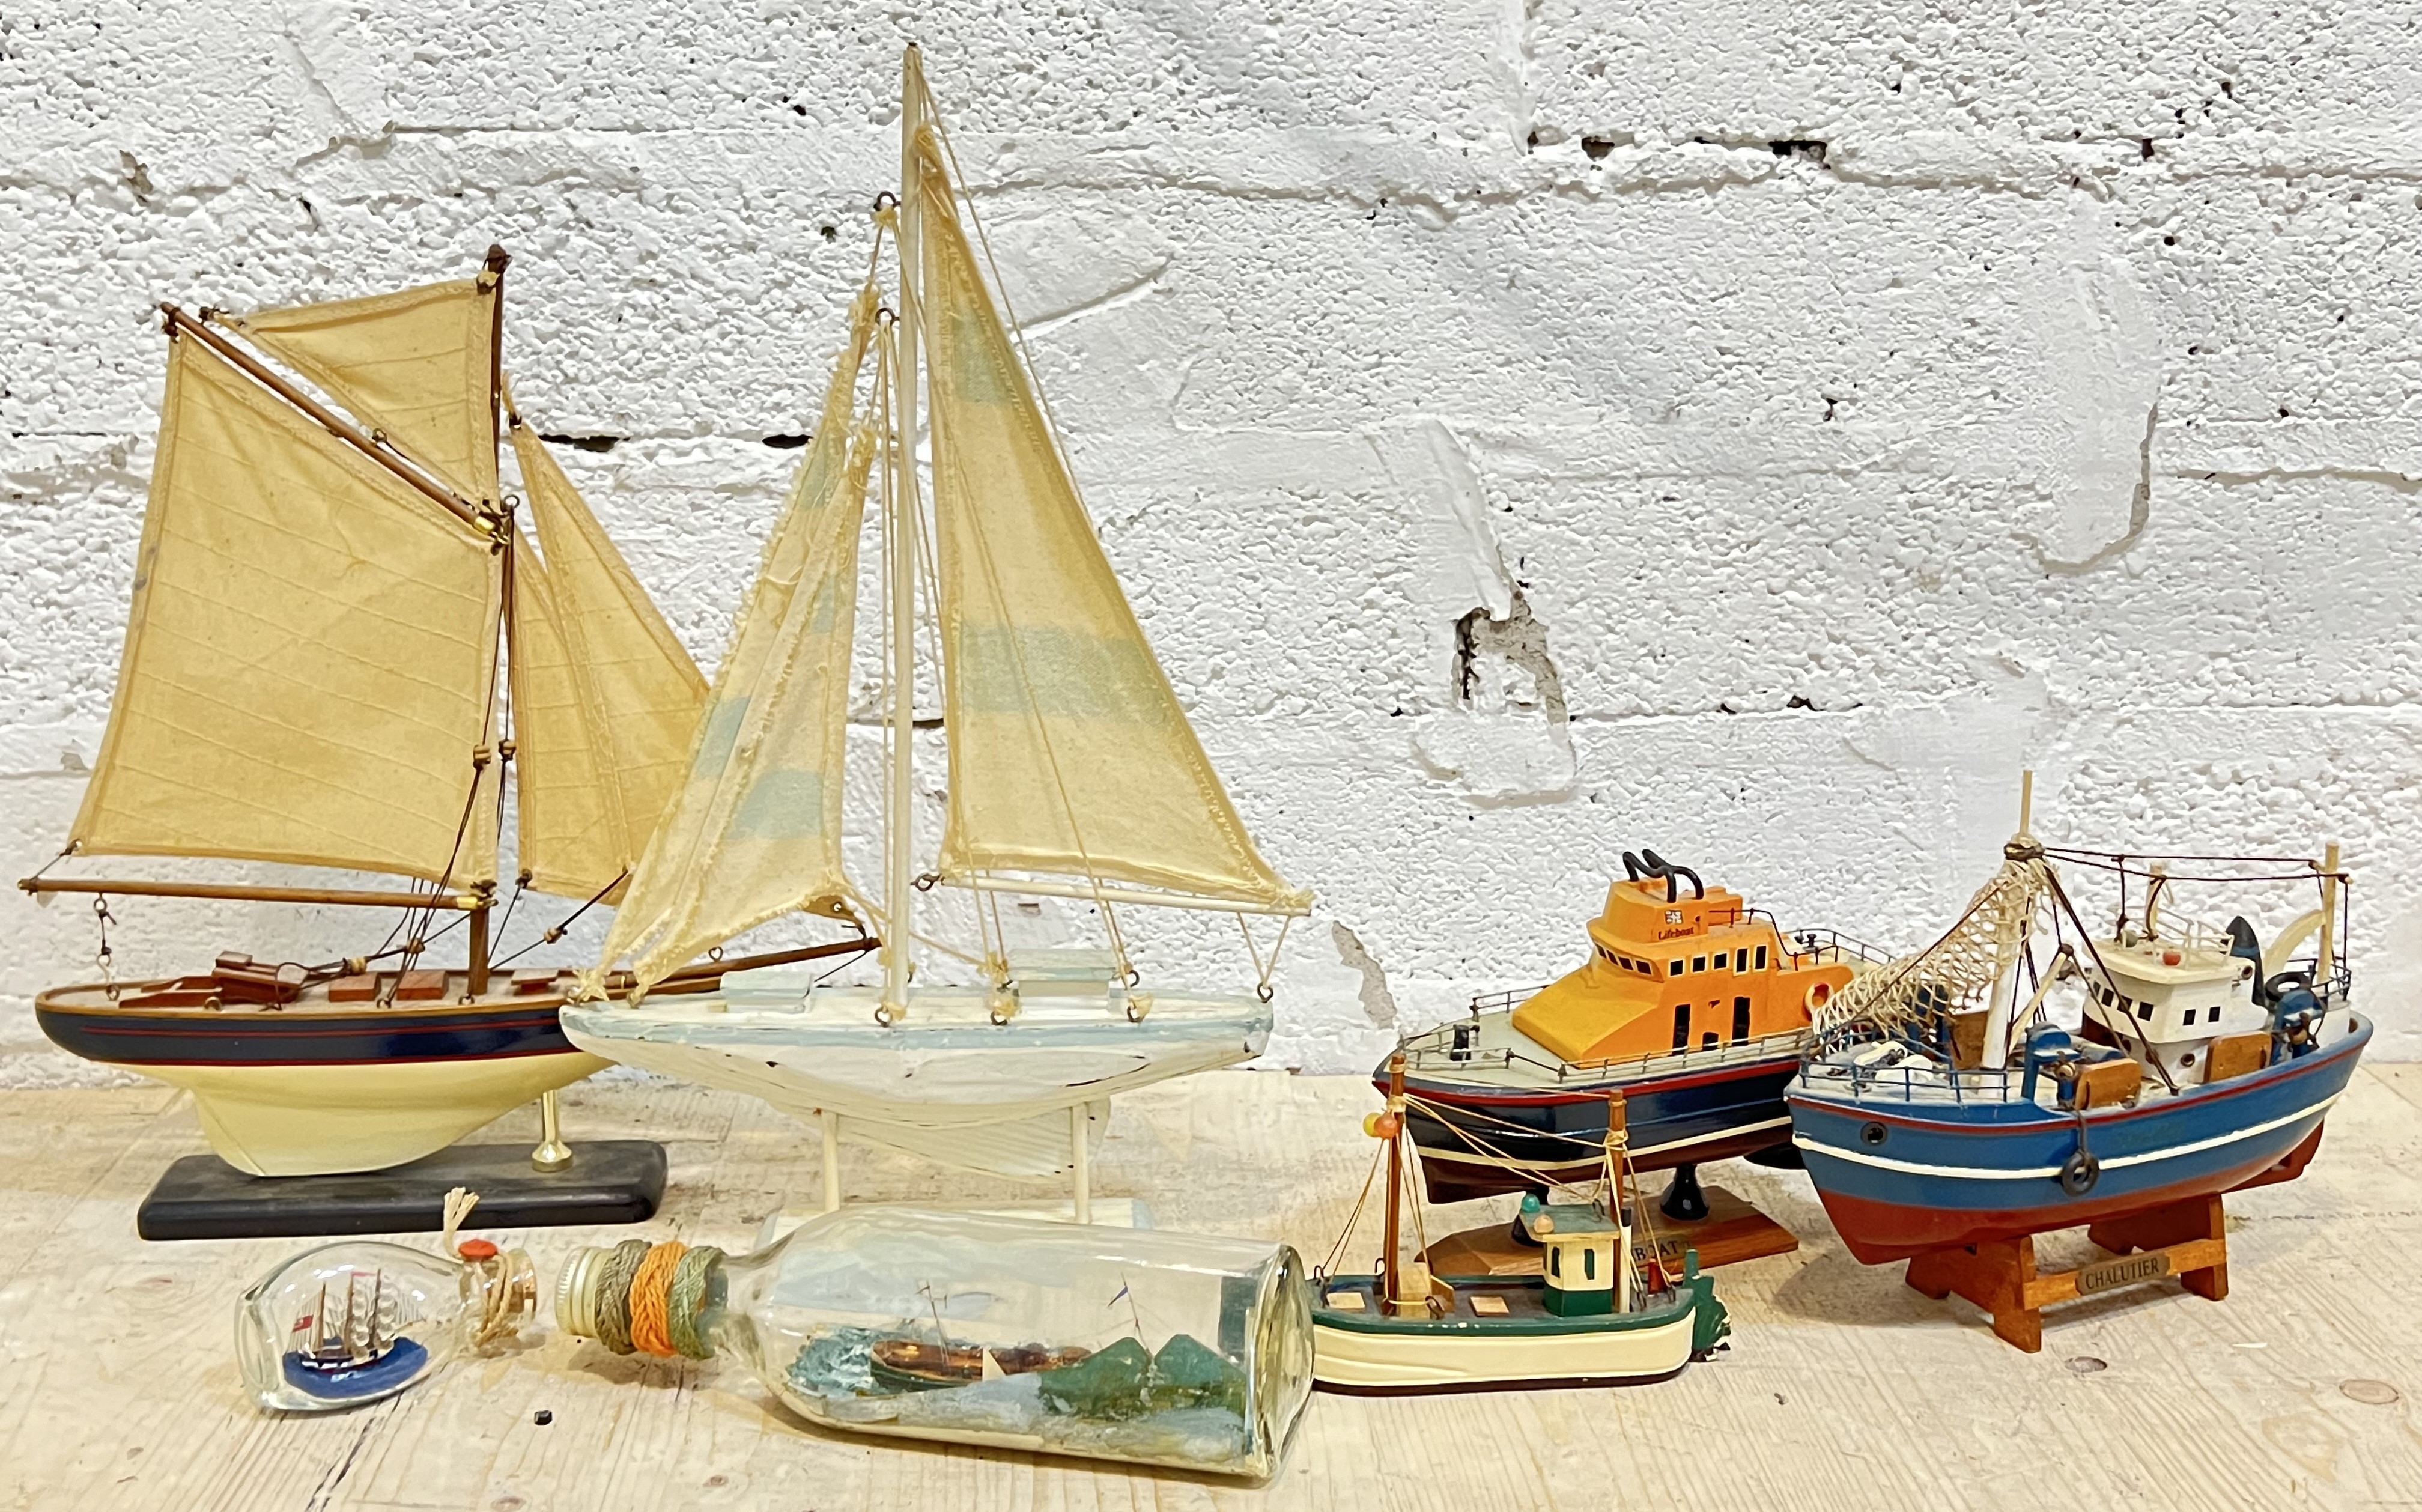 Maritime interest, a quantity of model boats and ships in bottles including sailboats, lifeboats